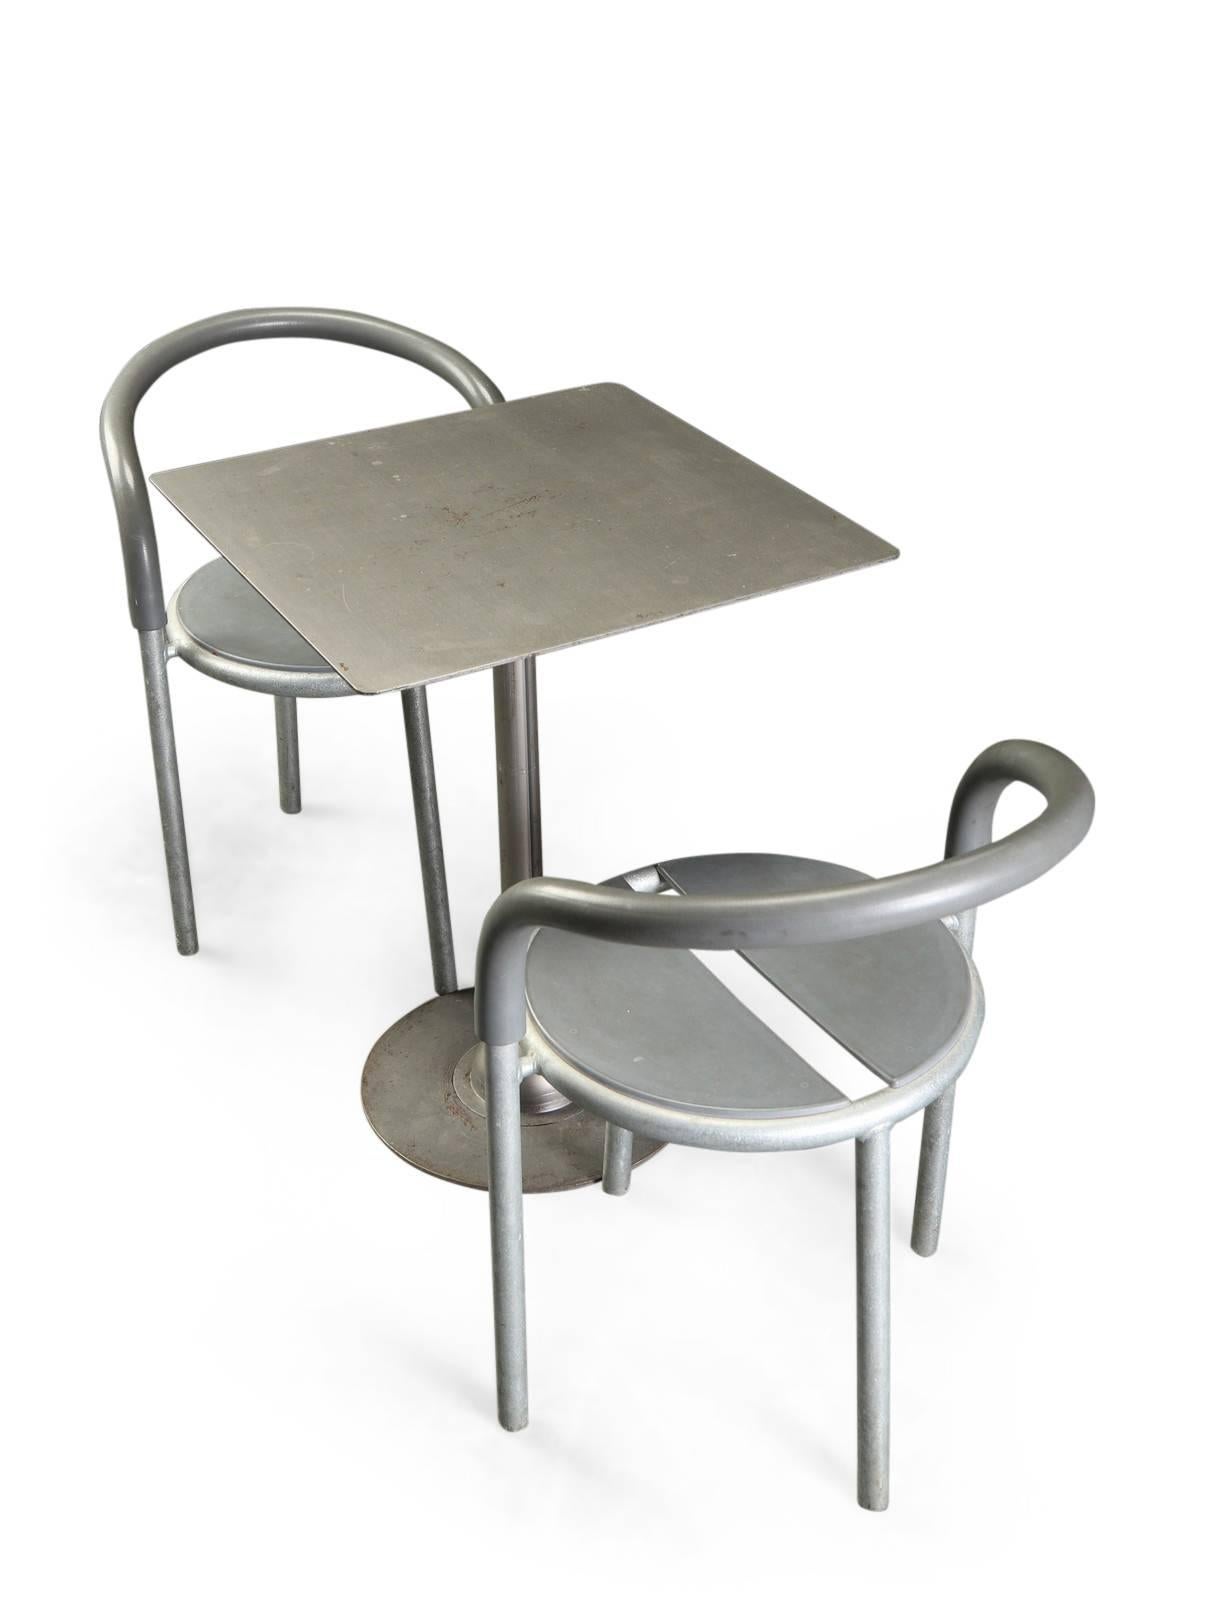 Niels Gammelgaard and Lars Mathiesen, Pair of stackable chairs / garden chairs with galvanized metal structure, gray rubber on the seat and backrest.
The chairs were created by Fritz Hansen, Pelikan Design in 1950s
Table included, H. 69, 55 x 55